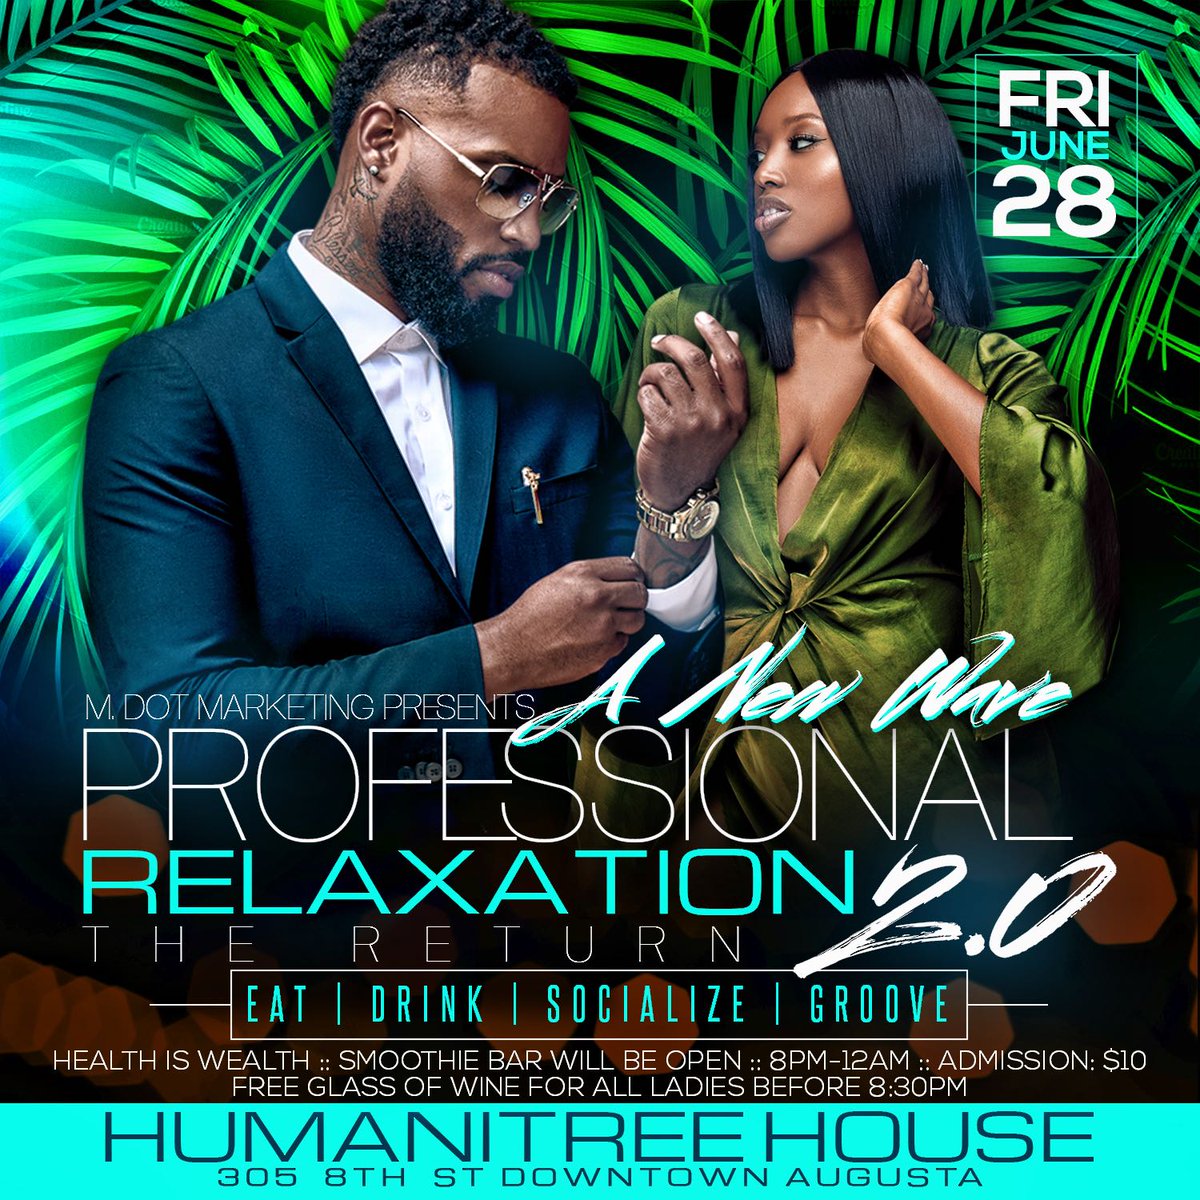 Friday June 28th we back at it!! #ProfessionalRelaxation the #AllNewWave of socializing!! Eat, Drink & be Social at @HumanitreeHouse with @MDOT_4daWin